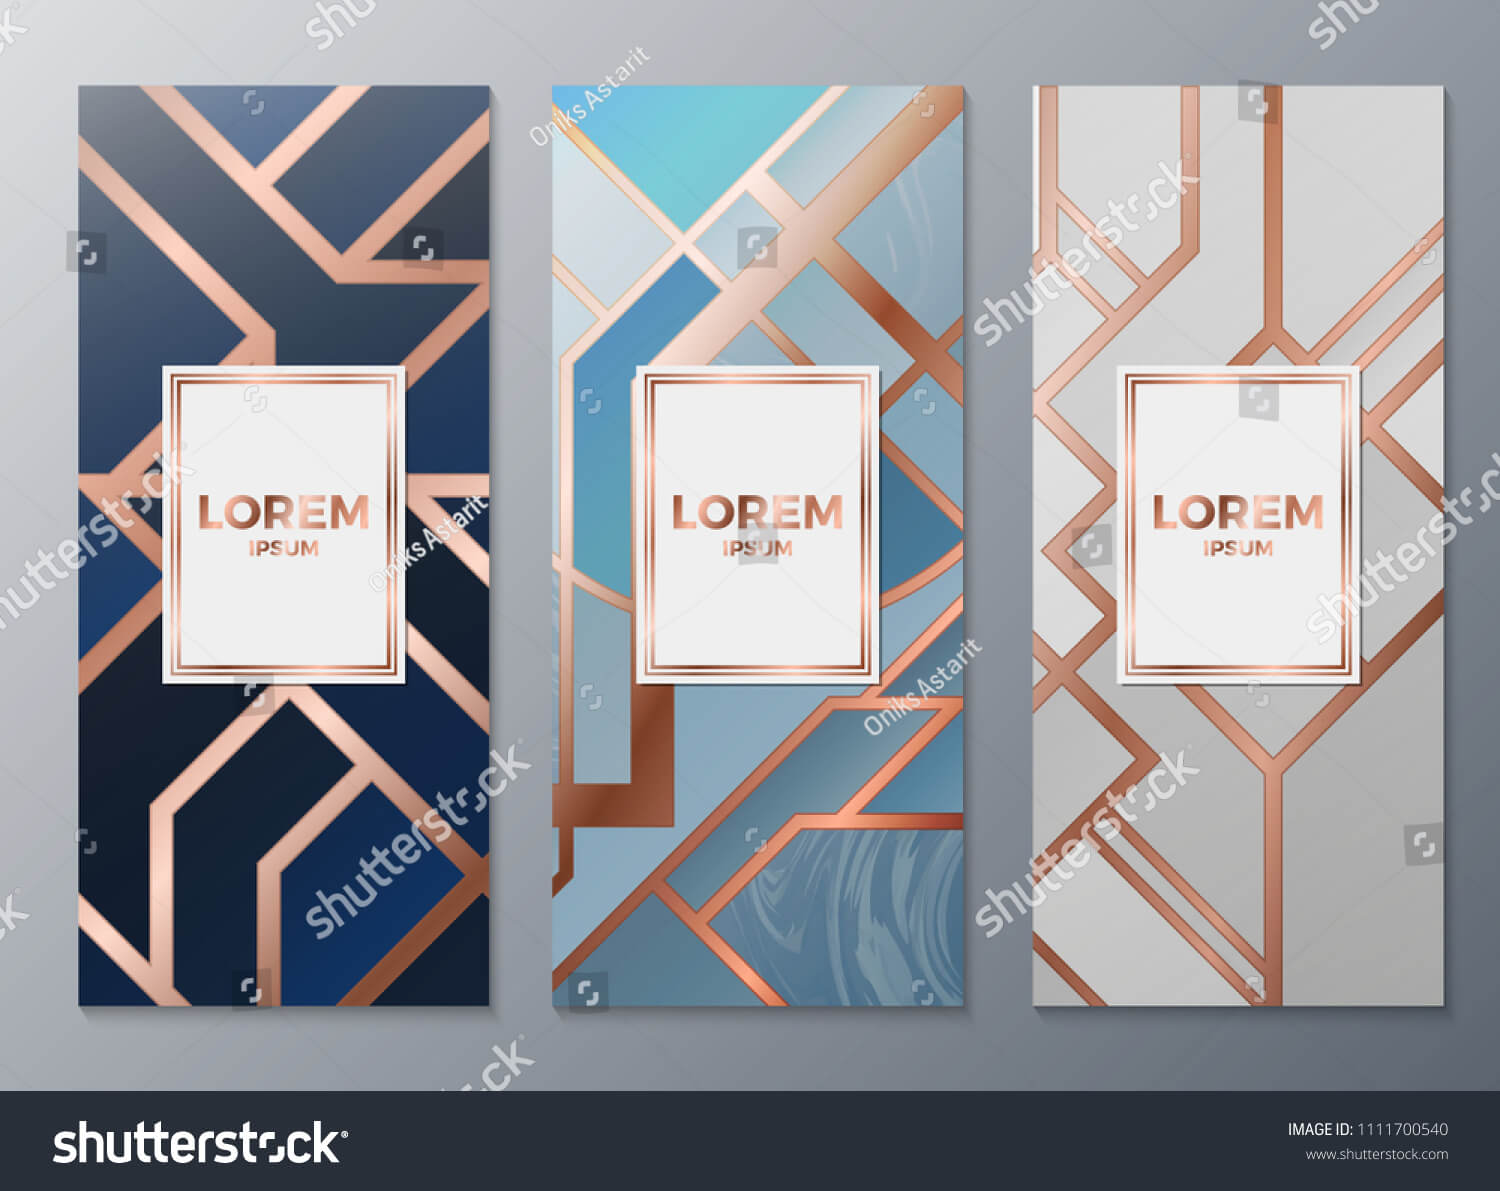 Design Templates Flyers Booklets Greeting Cards Stock Vector With Regard To Advertising Cards Templates